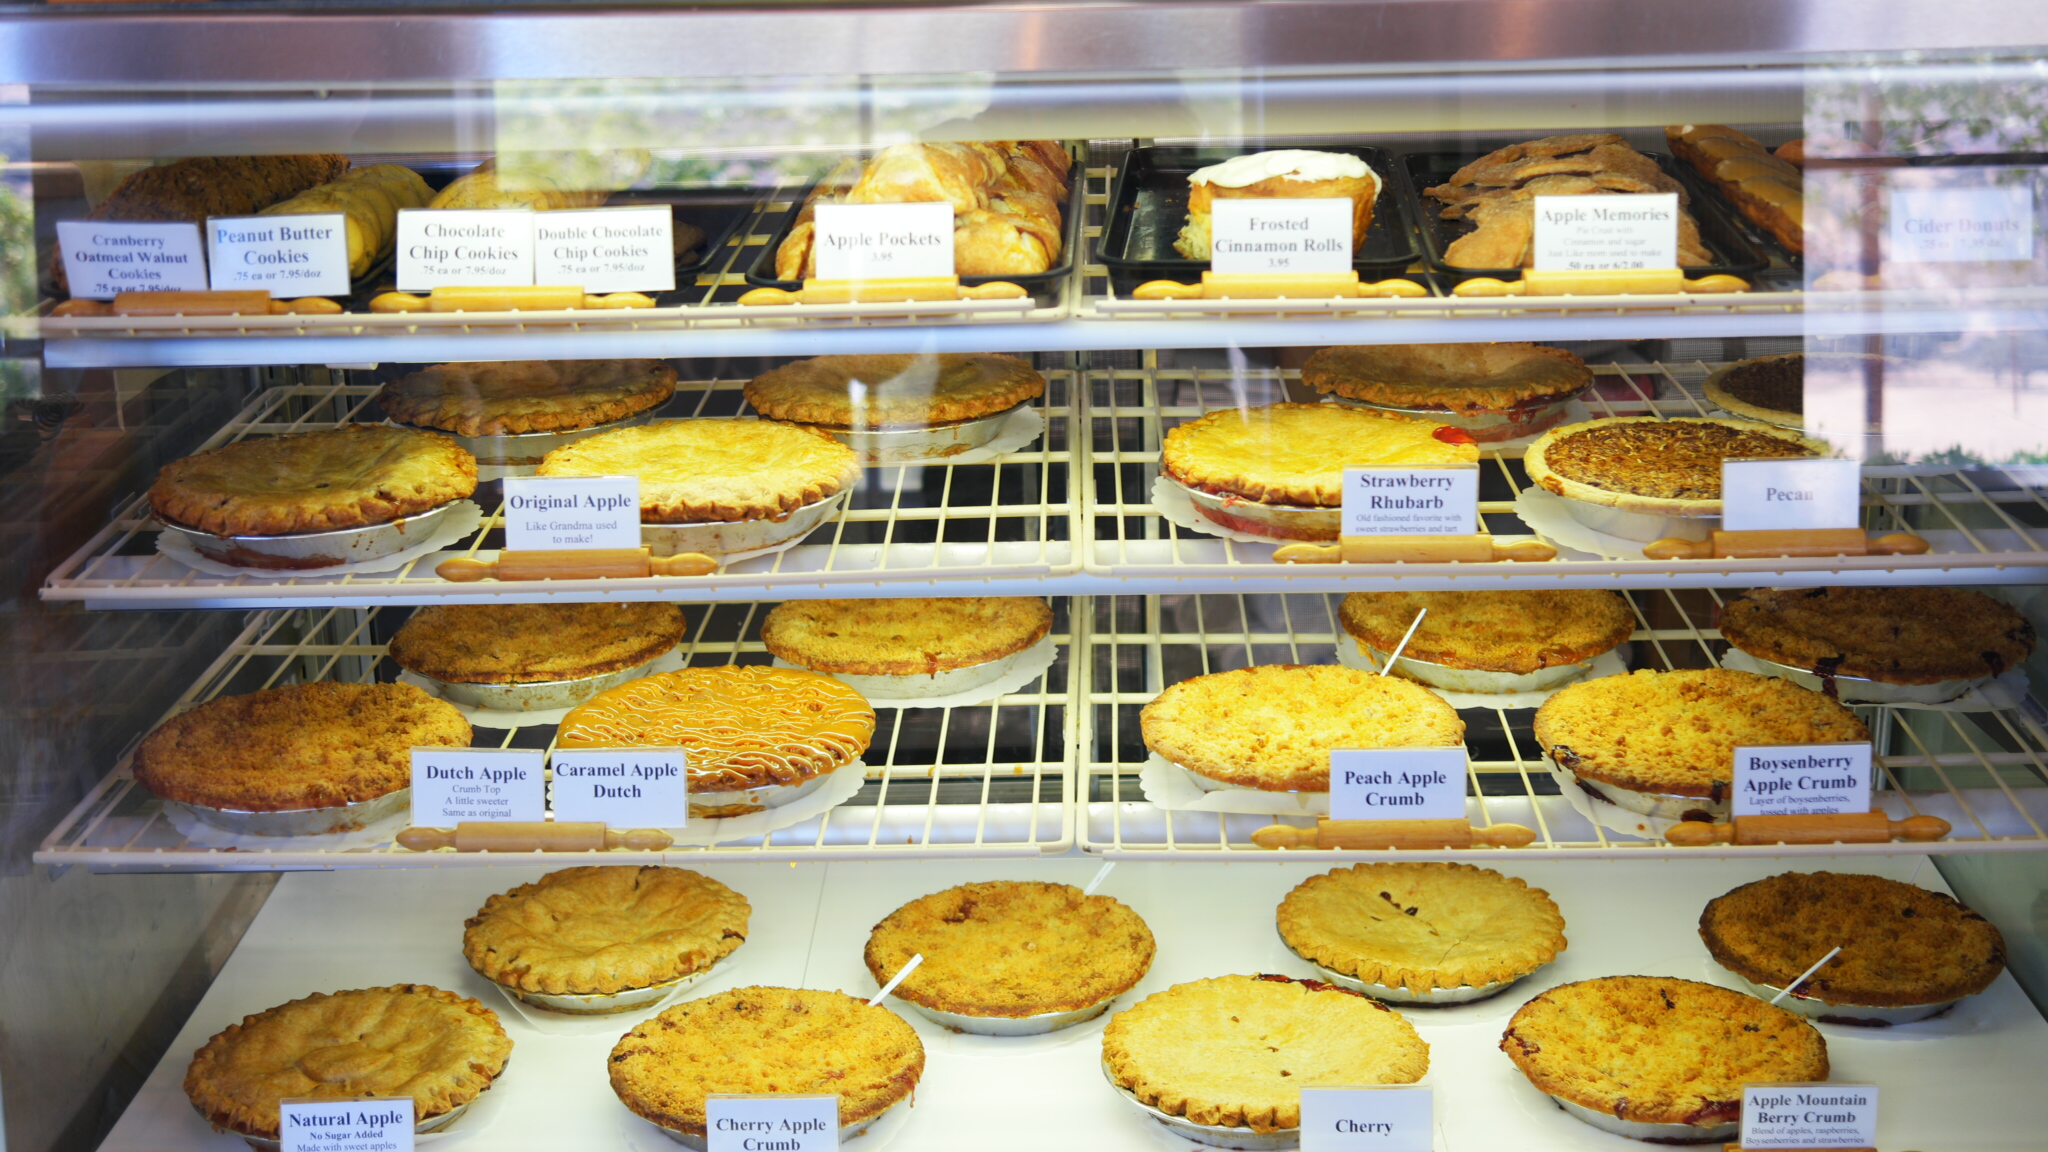 So many pies to choose from!